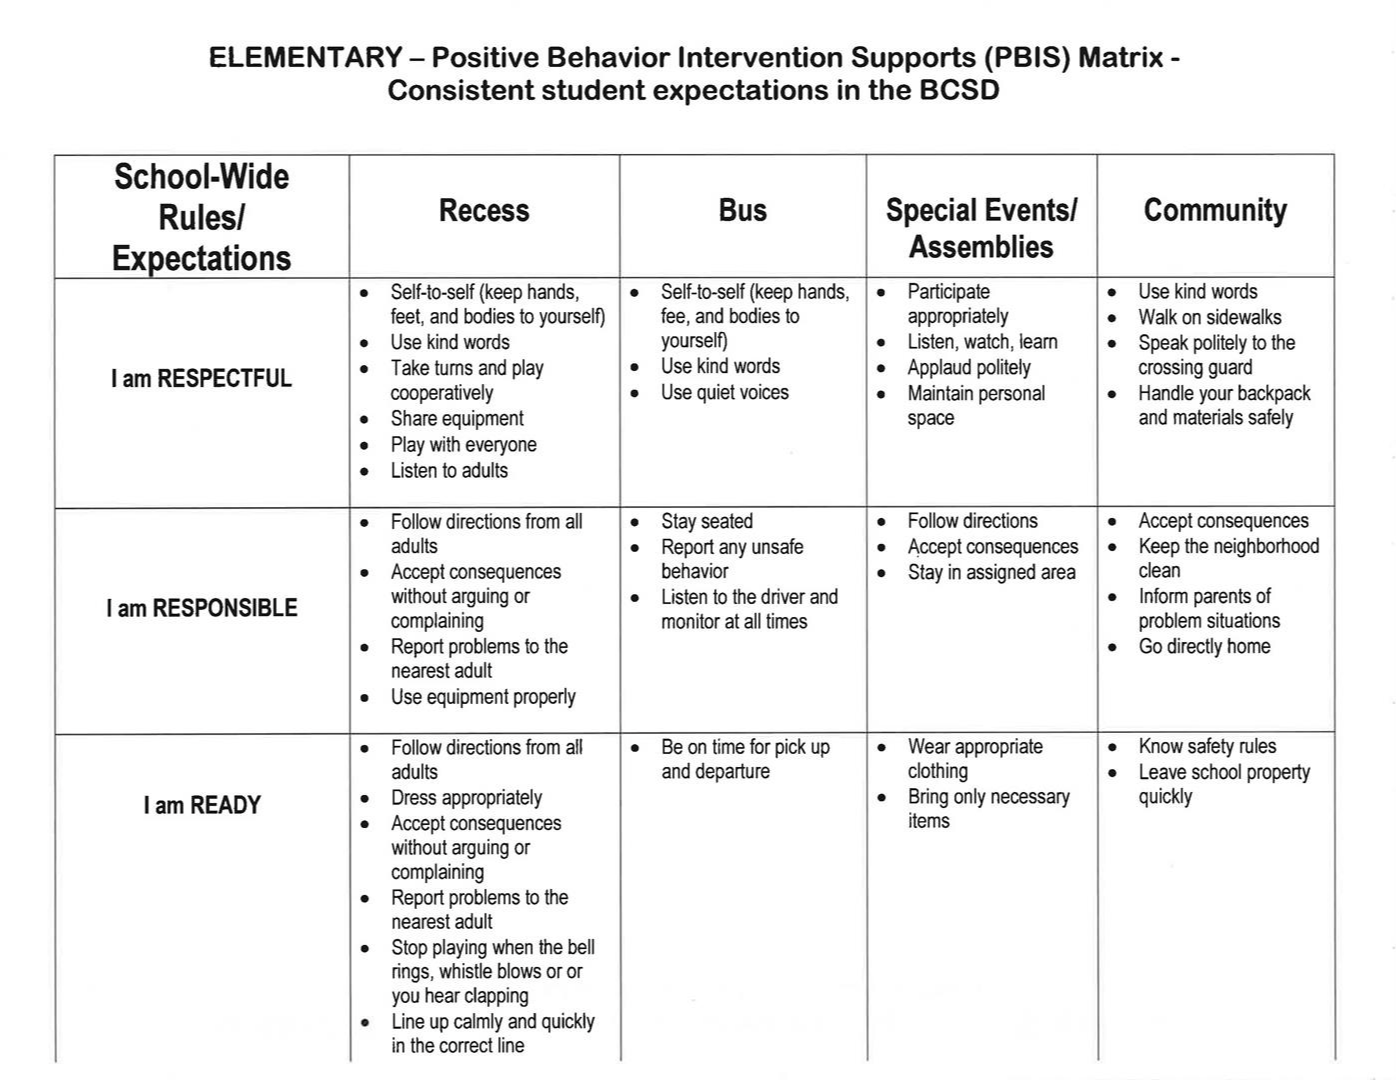 school wide rules and expectations table, positive behaviour intervention supports matrix